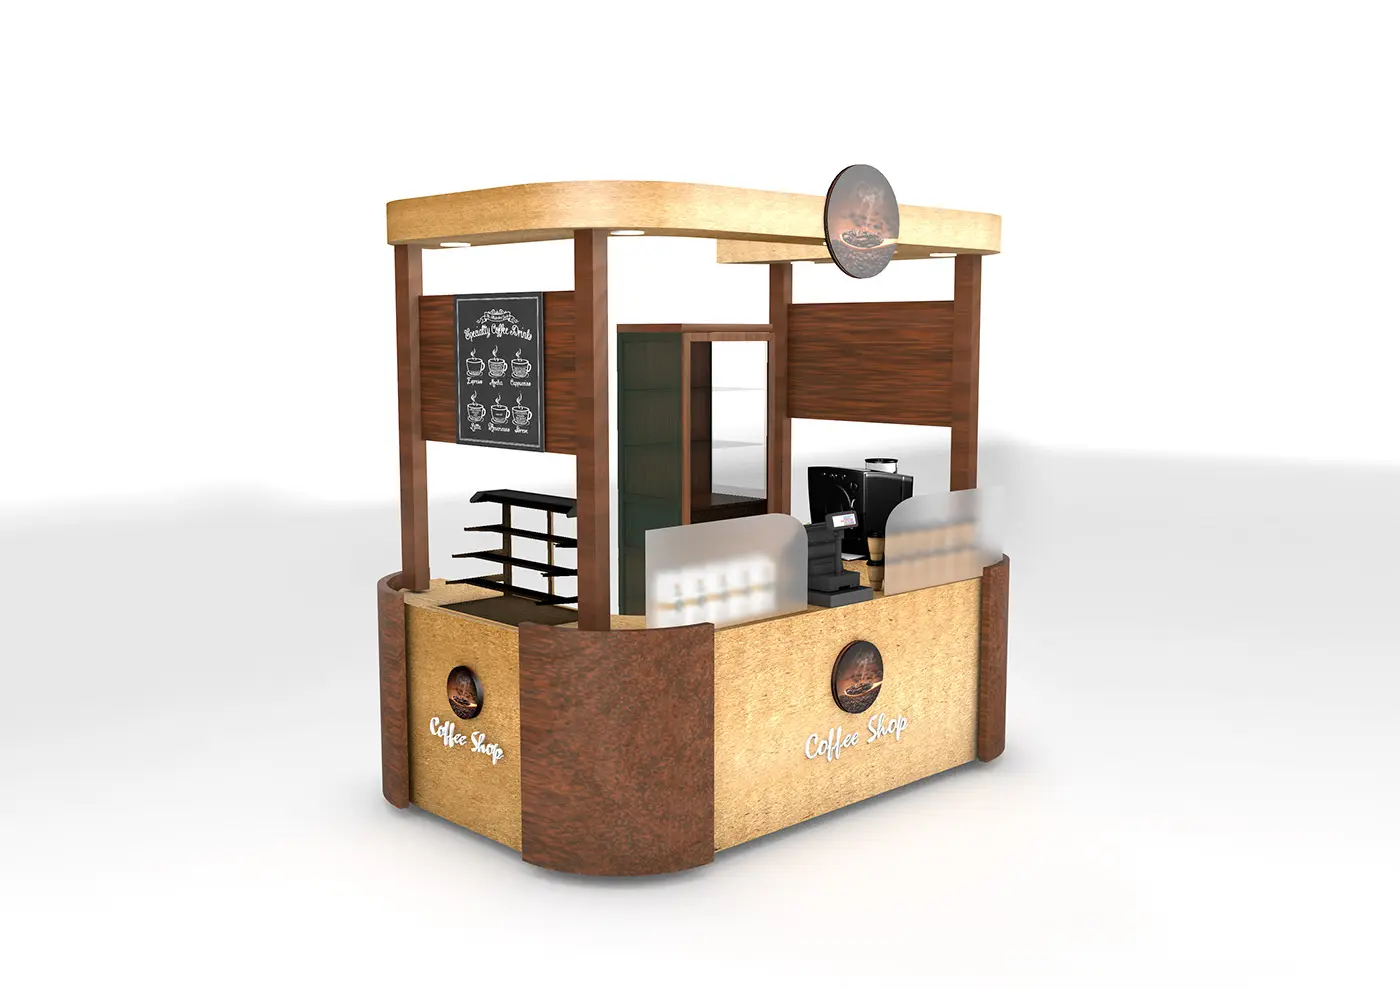 Wooden strip coffee kiosk mini cafe indoor booth design